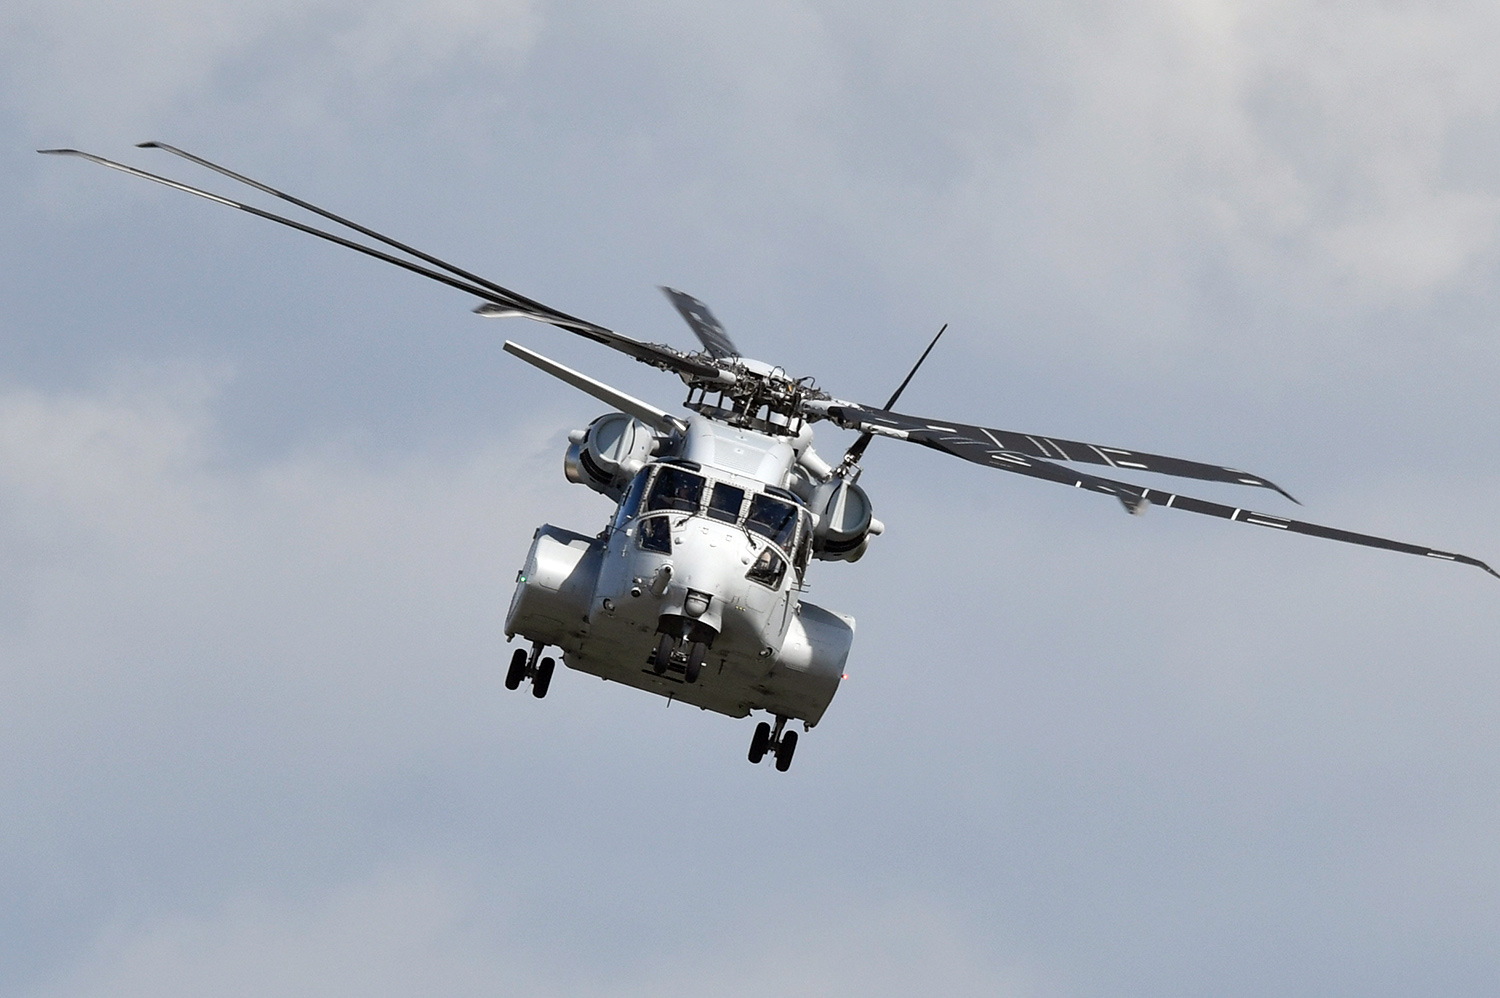 A CH-53K King Stallion heavy-lift cargo helicopter